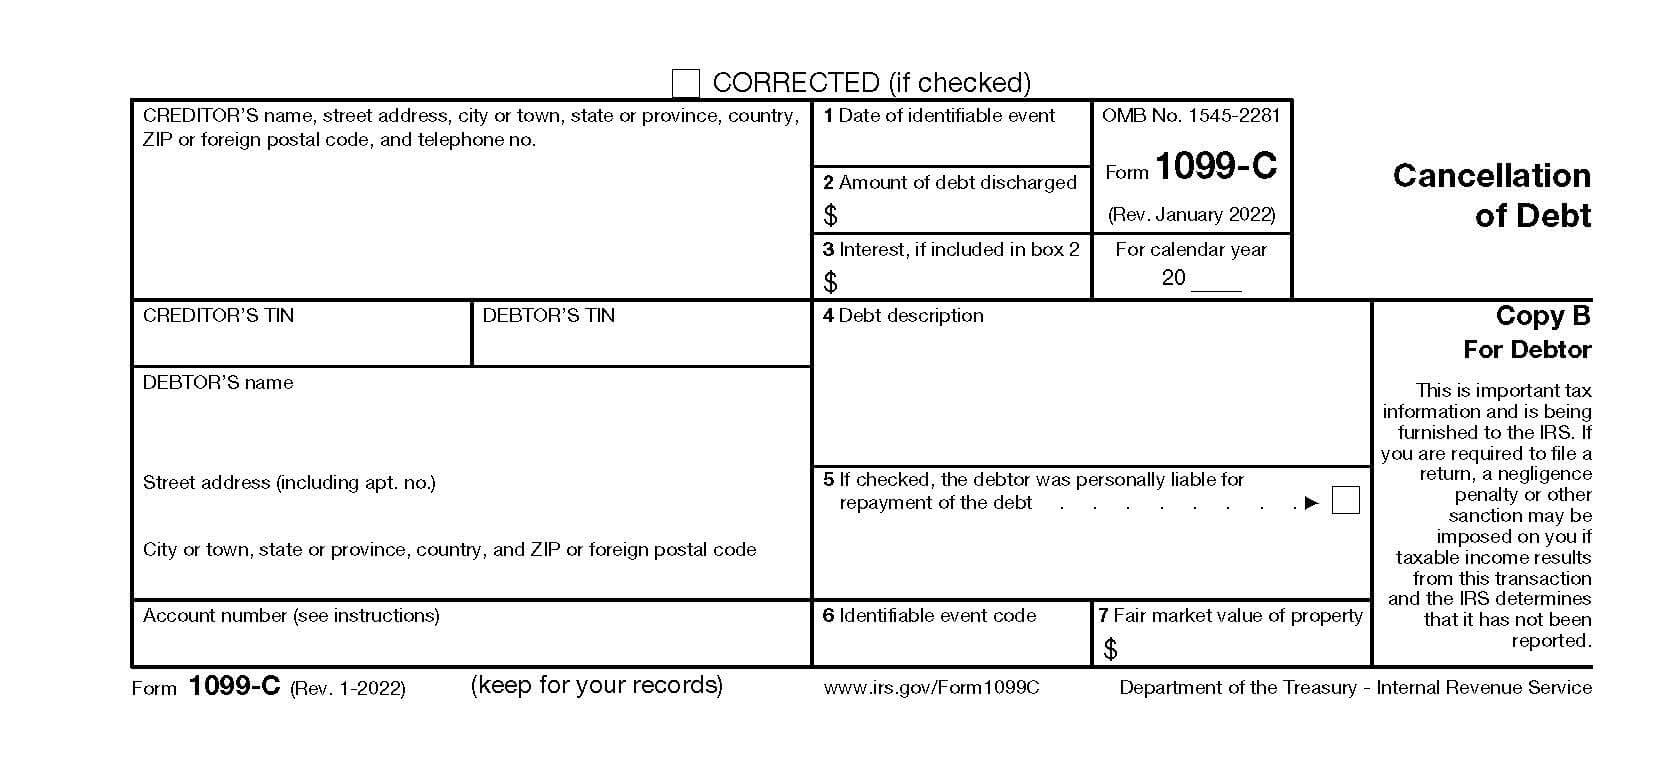 IRS form 1099-C example